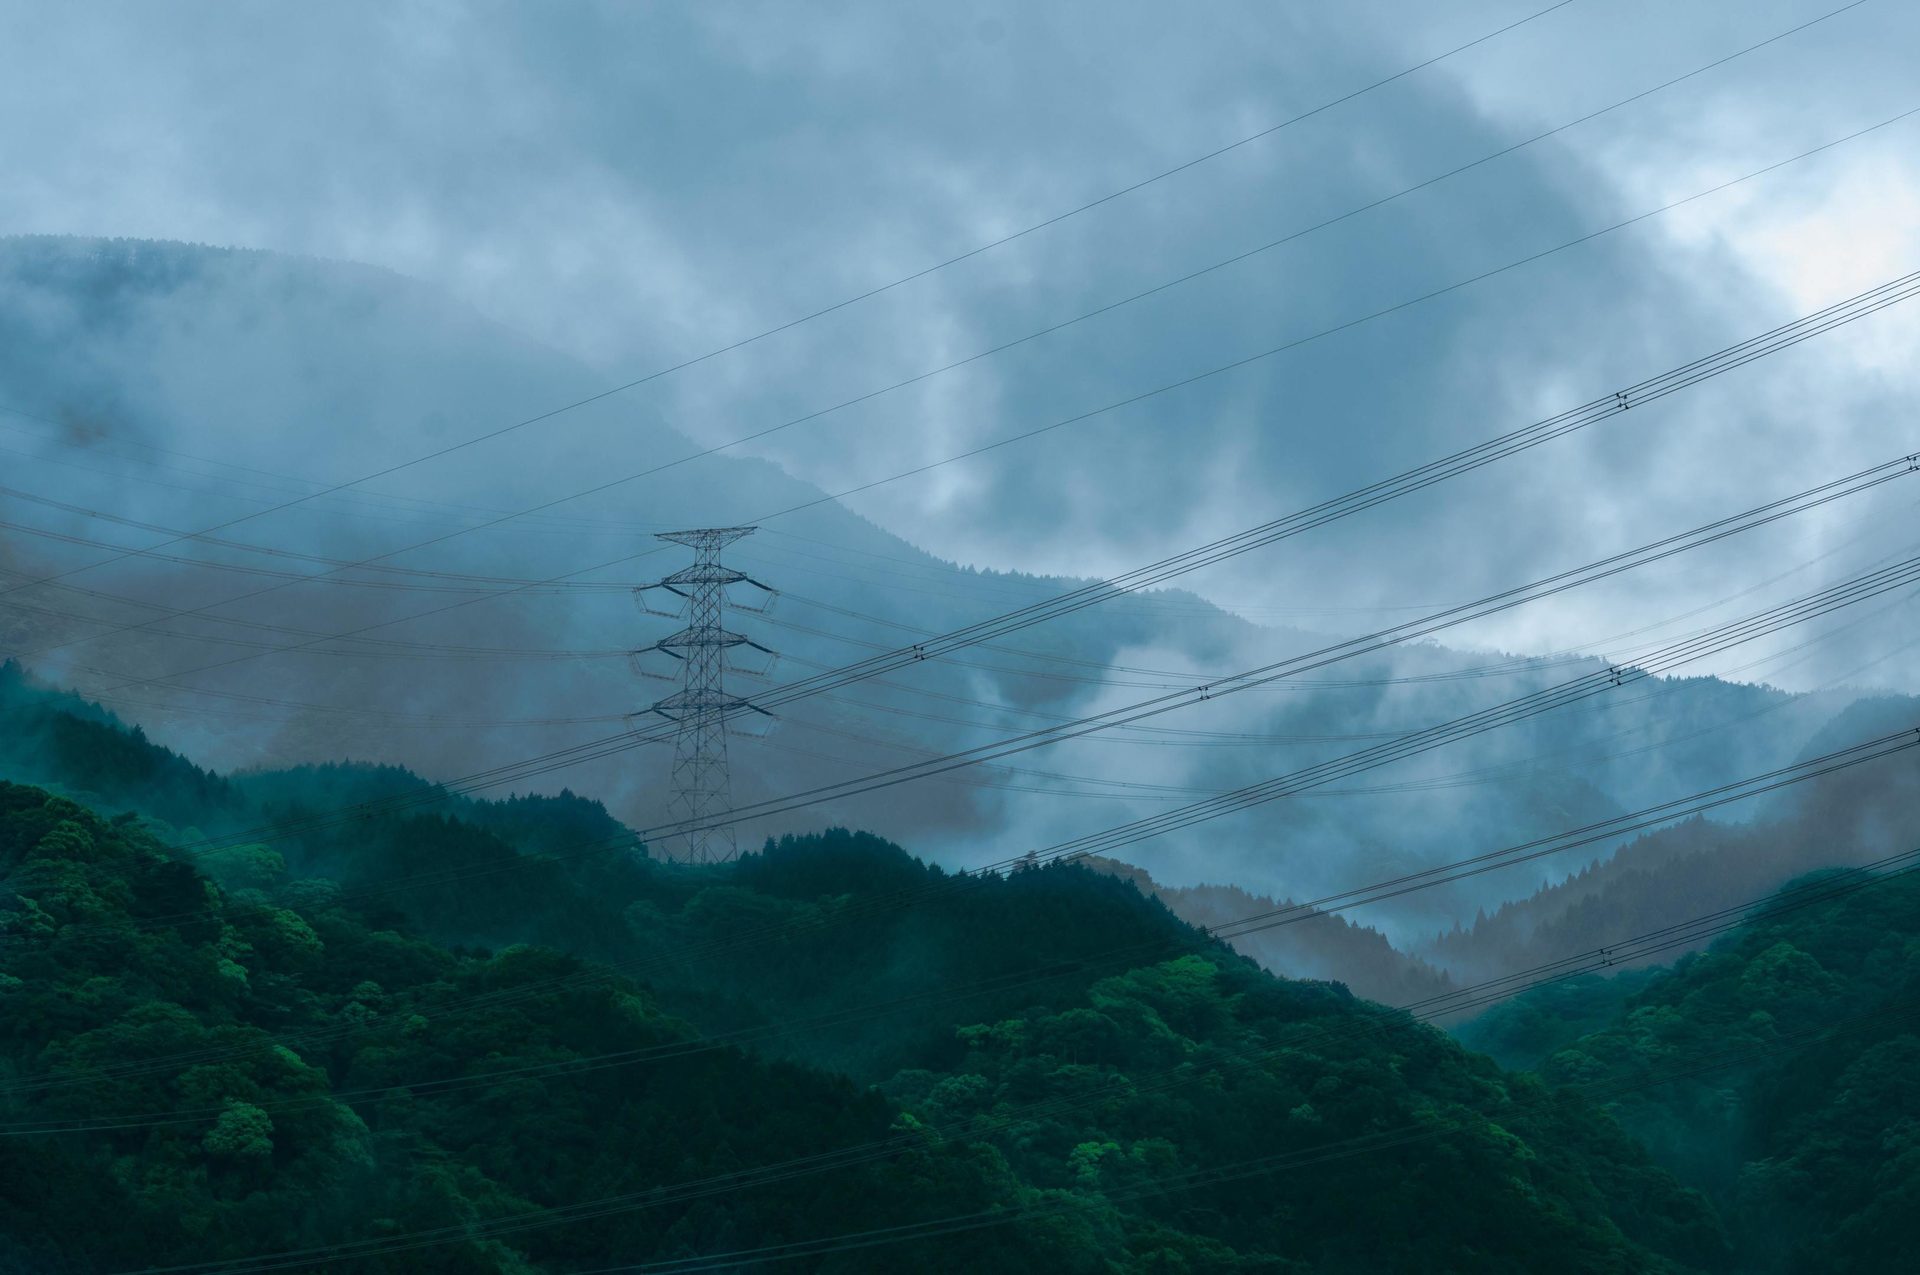 Overhead power line, Natural environment, Cloud, Sky, Atmosphere, Mountain, Ecoregion, Slope, Electricity, Highland